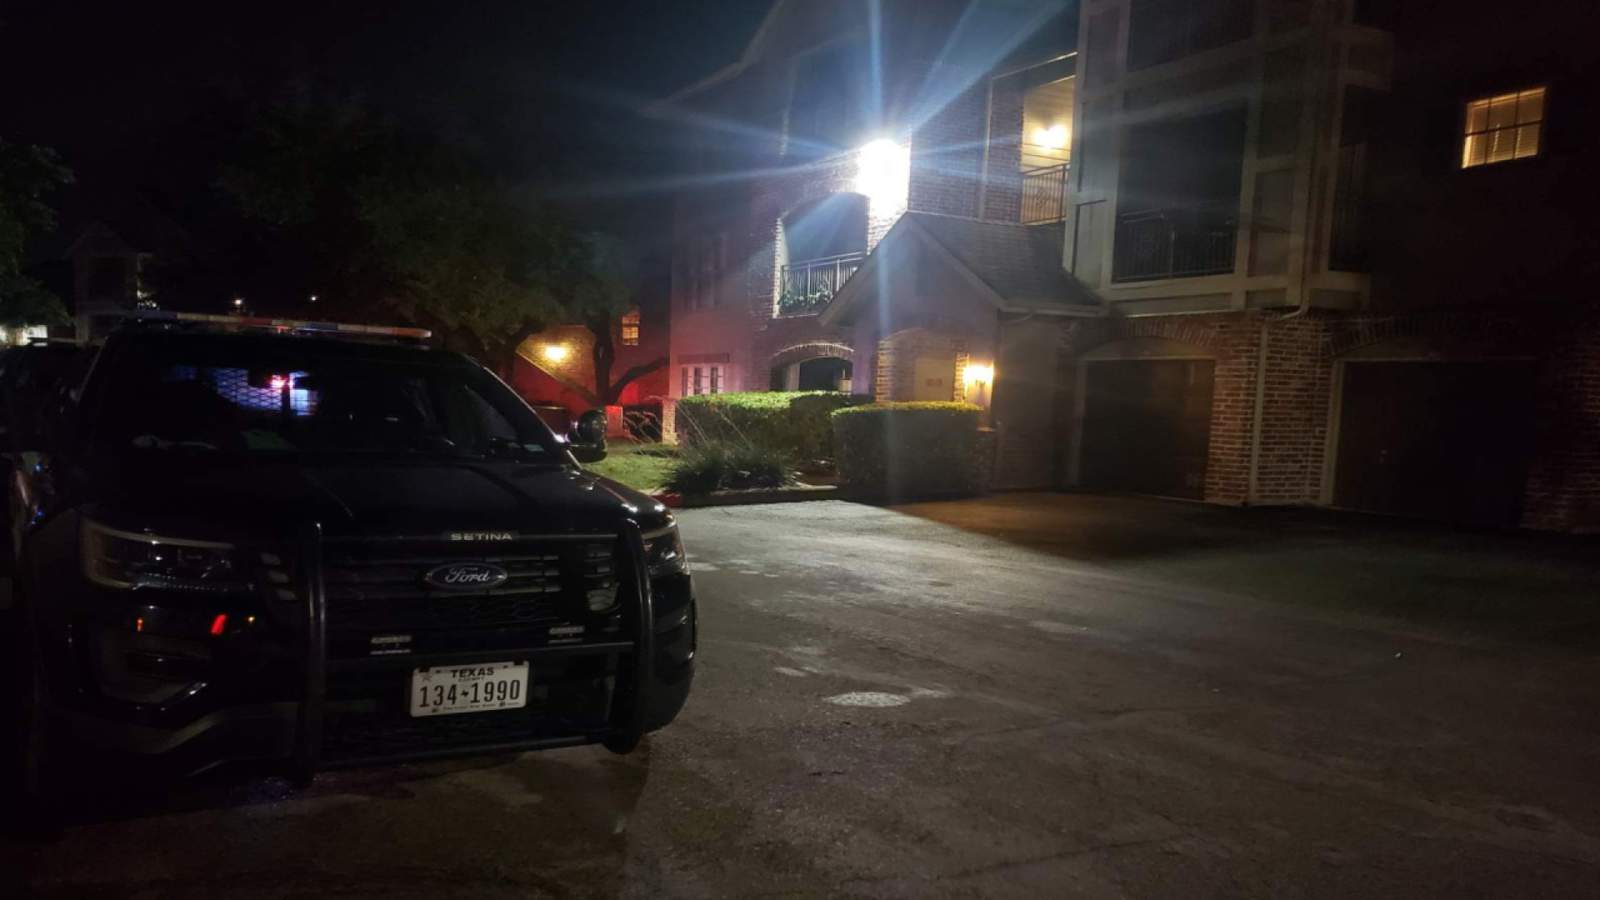 Neighbors reported hearing screaming hours before baby found dead